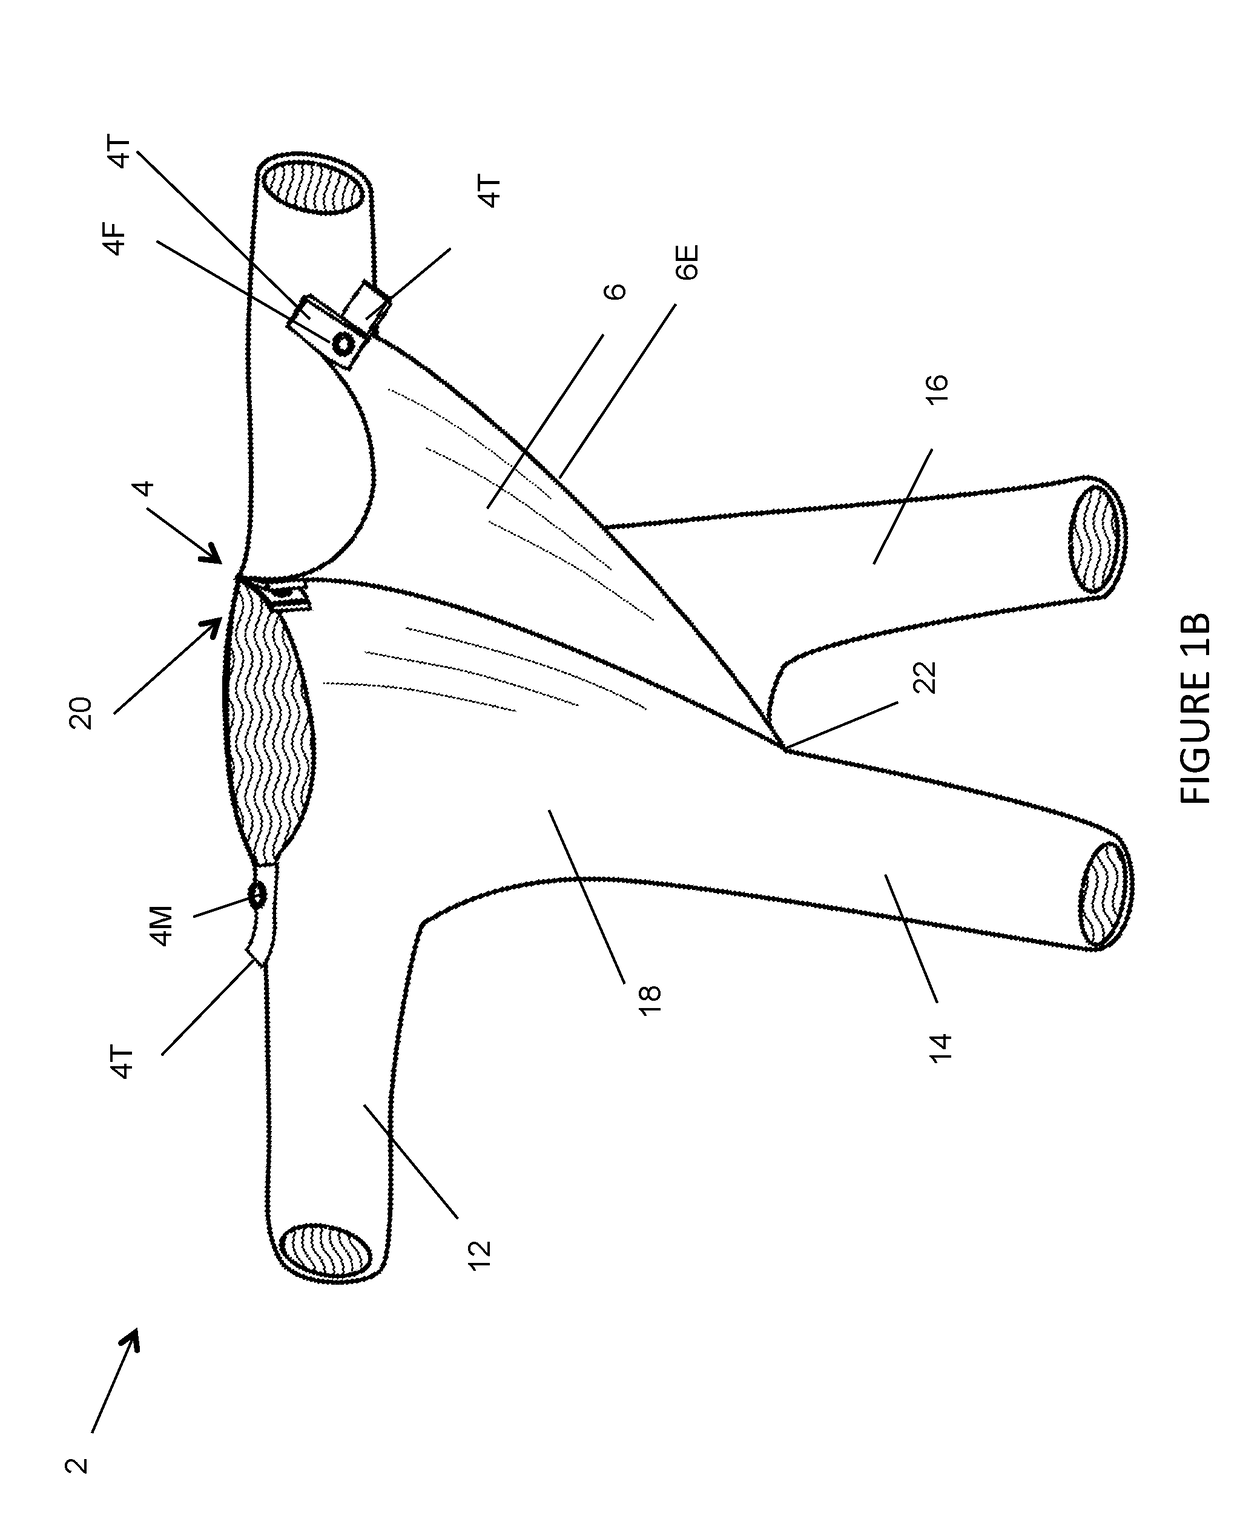 Clothing selectively enabling skin-to-skin contact